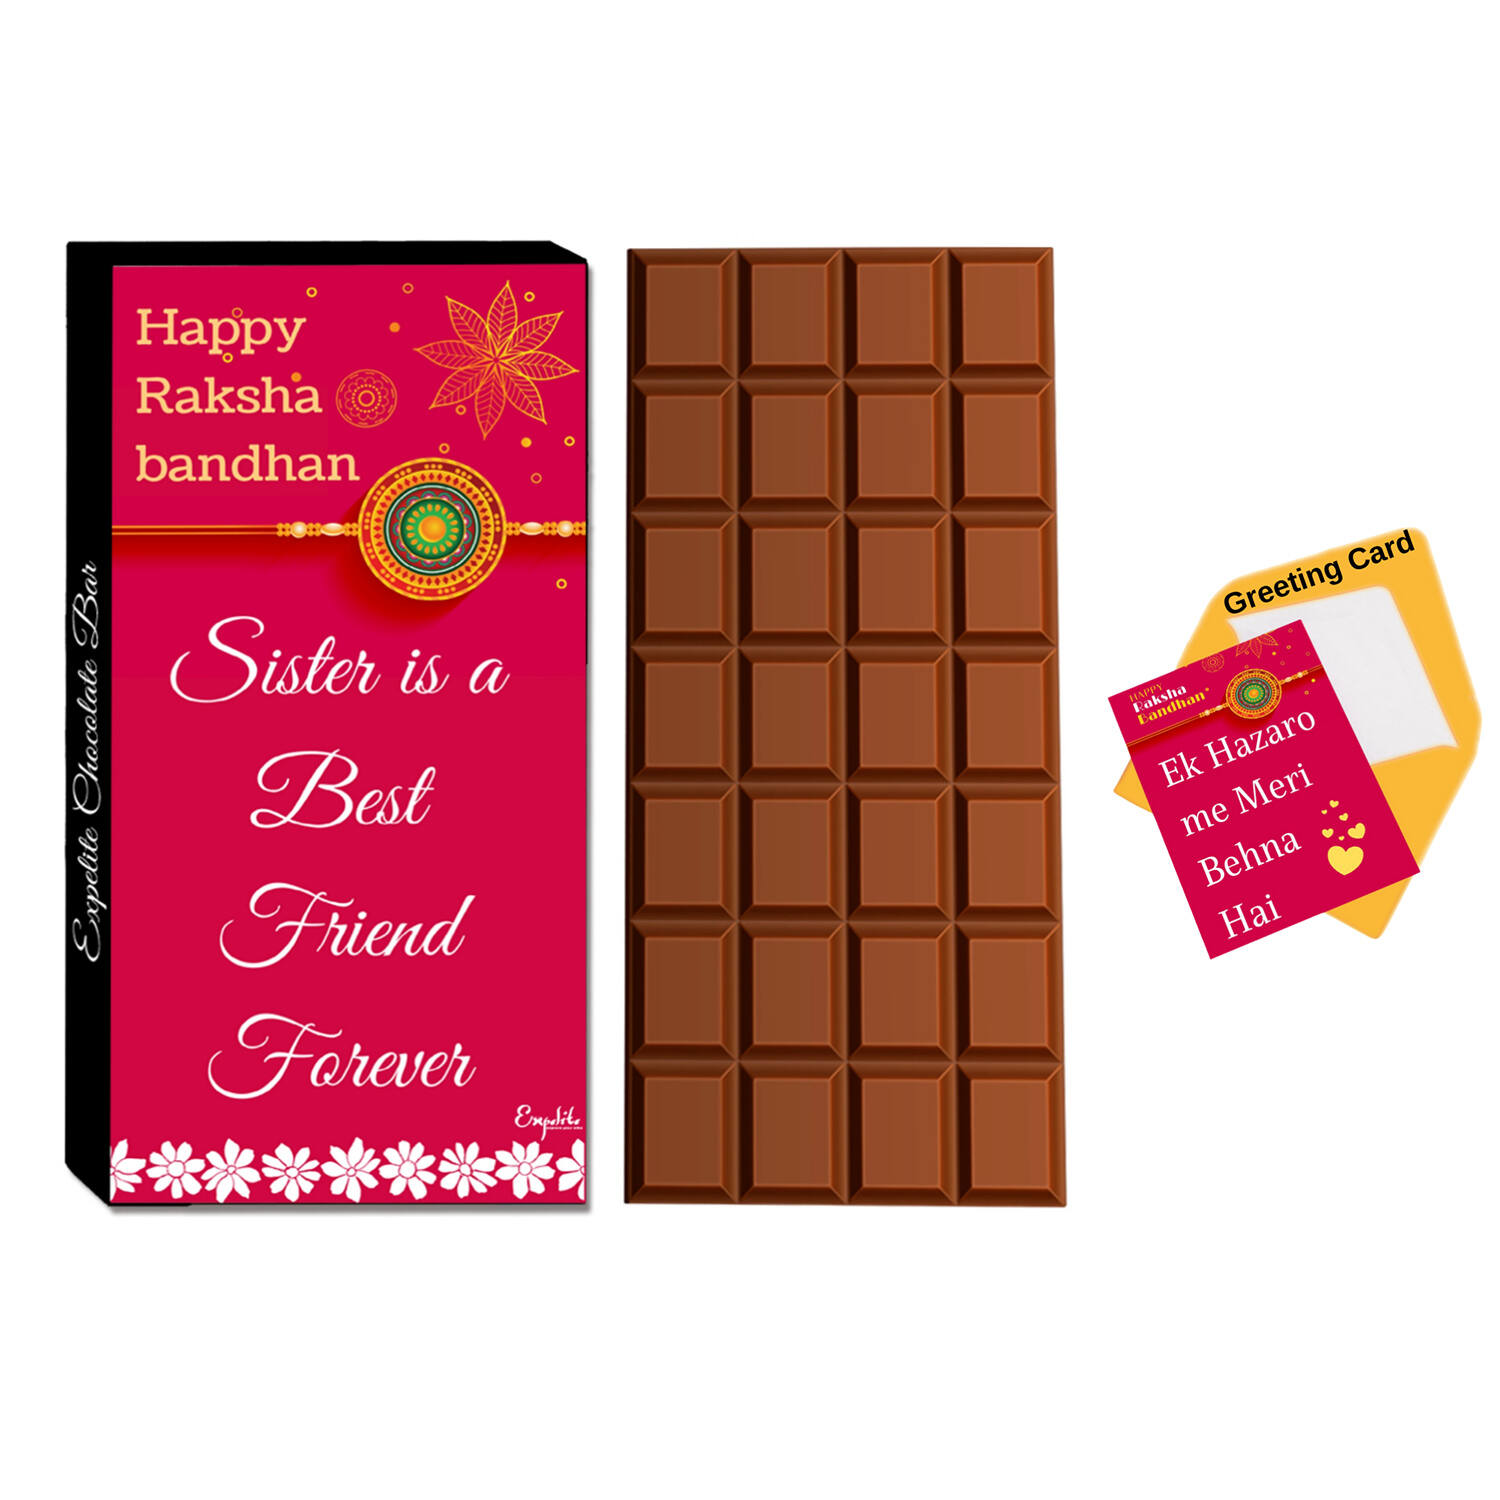 Chocolate gift box for your cute little sister & Brother at Rs 786.00 |  Hastsal | New Delhi| ID: 2852528482462